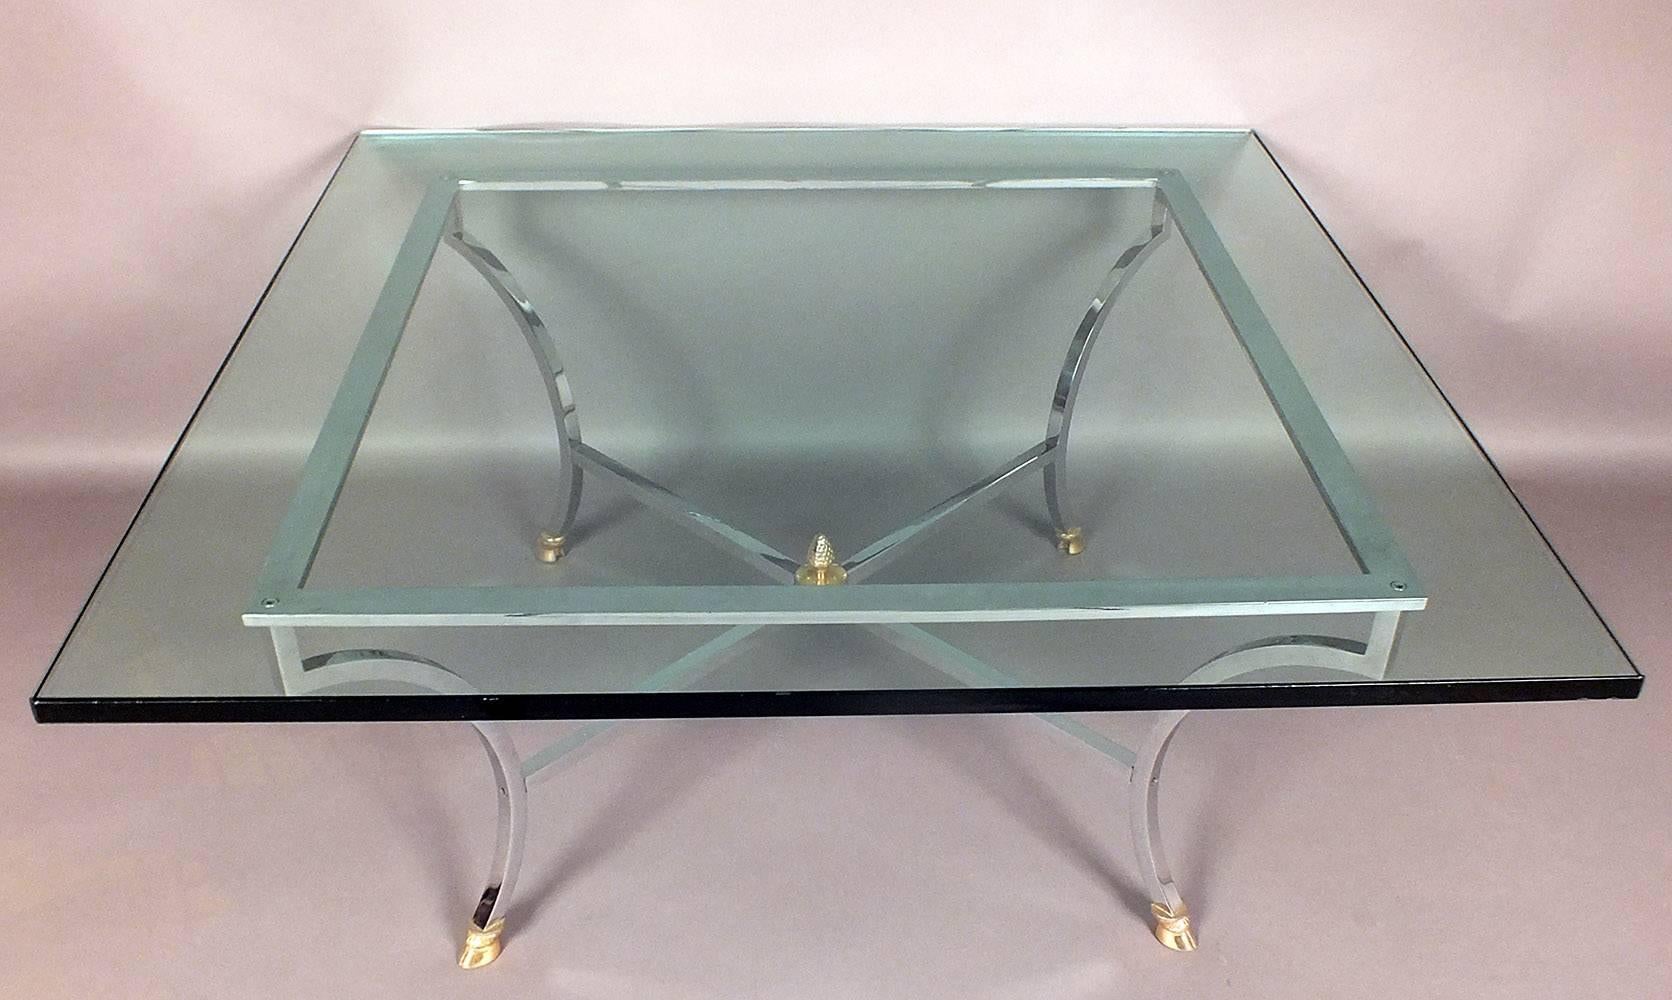 This 1970's Vintage Hollywood Regency-style coffee table features a square glass top that is 3/4 inches thick with a flat polish finish. Holding up the glass is a sleek square brass frame in a chrome color with X-shaped stretched legs and a finial